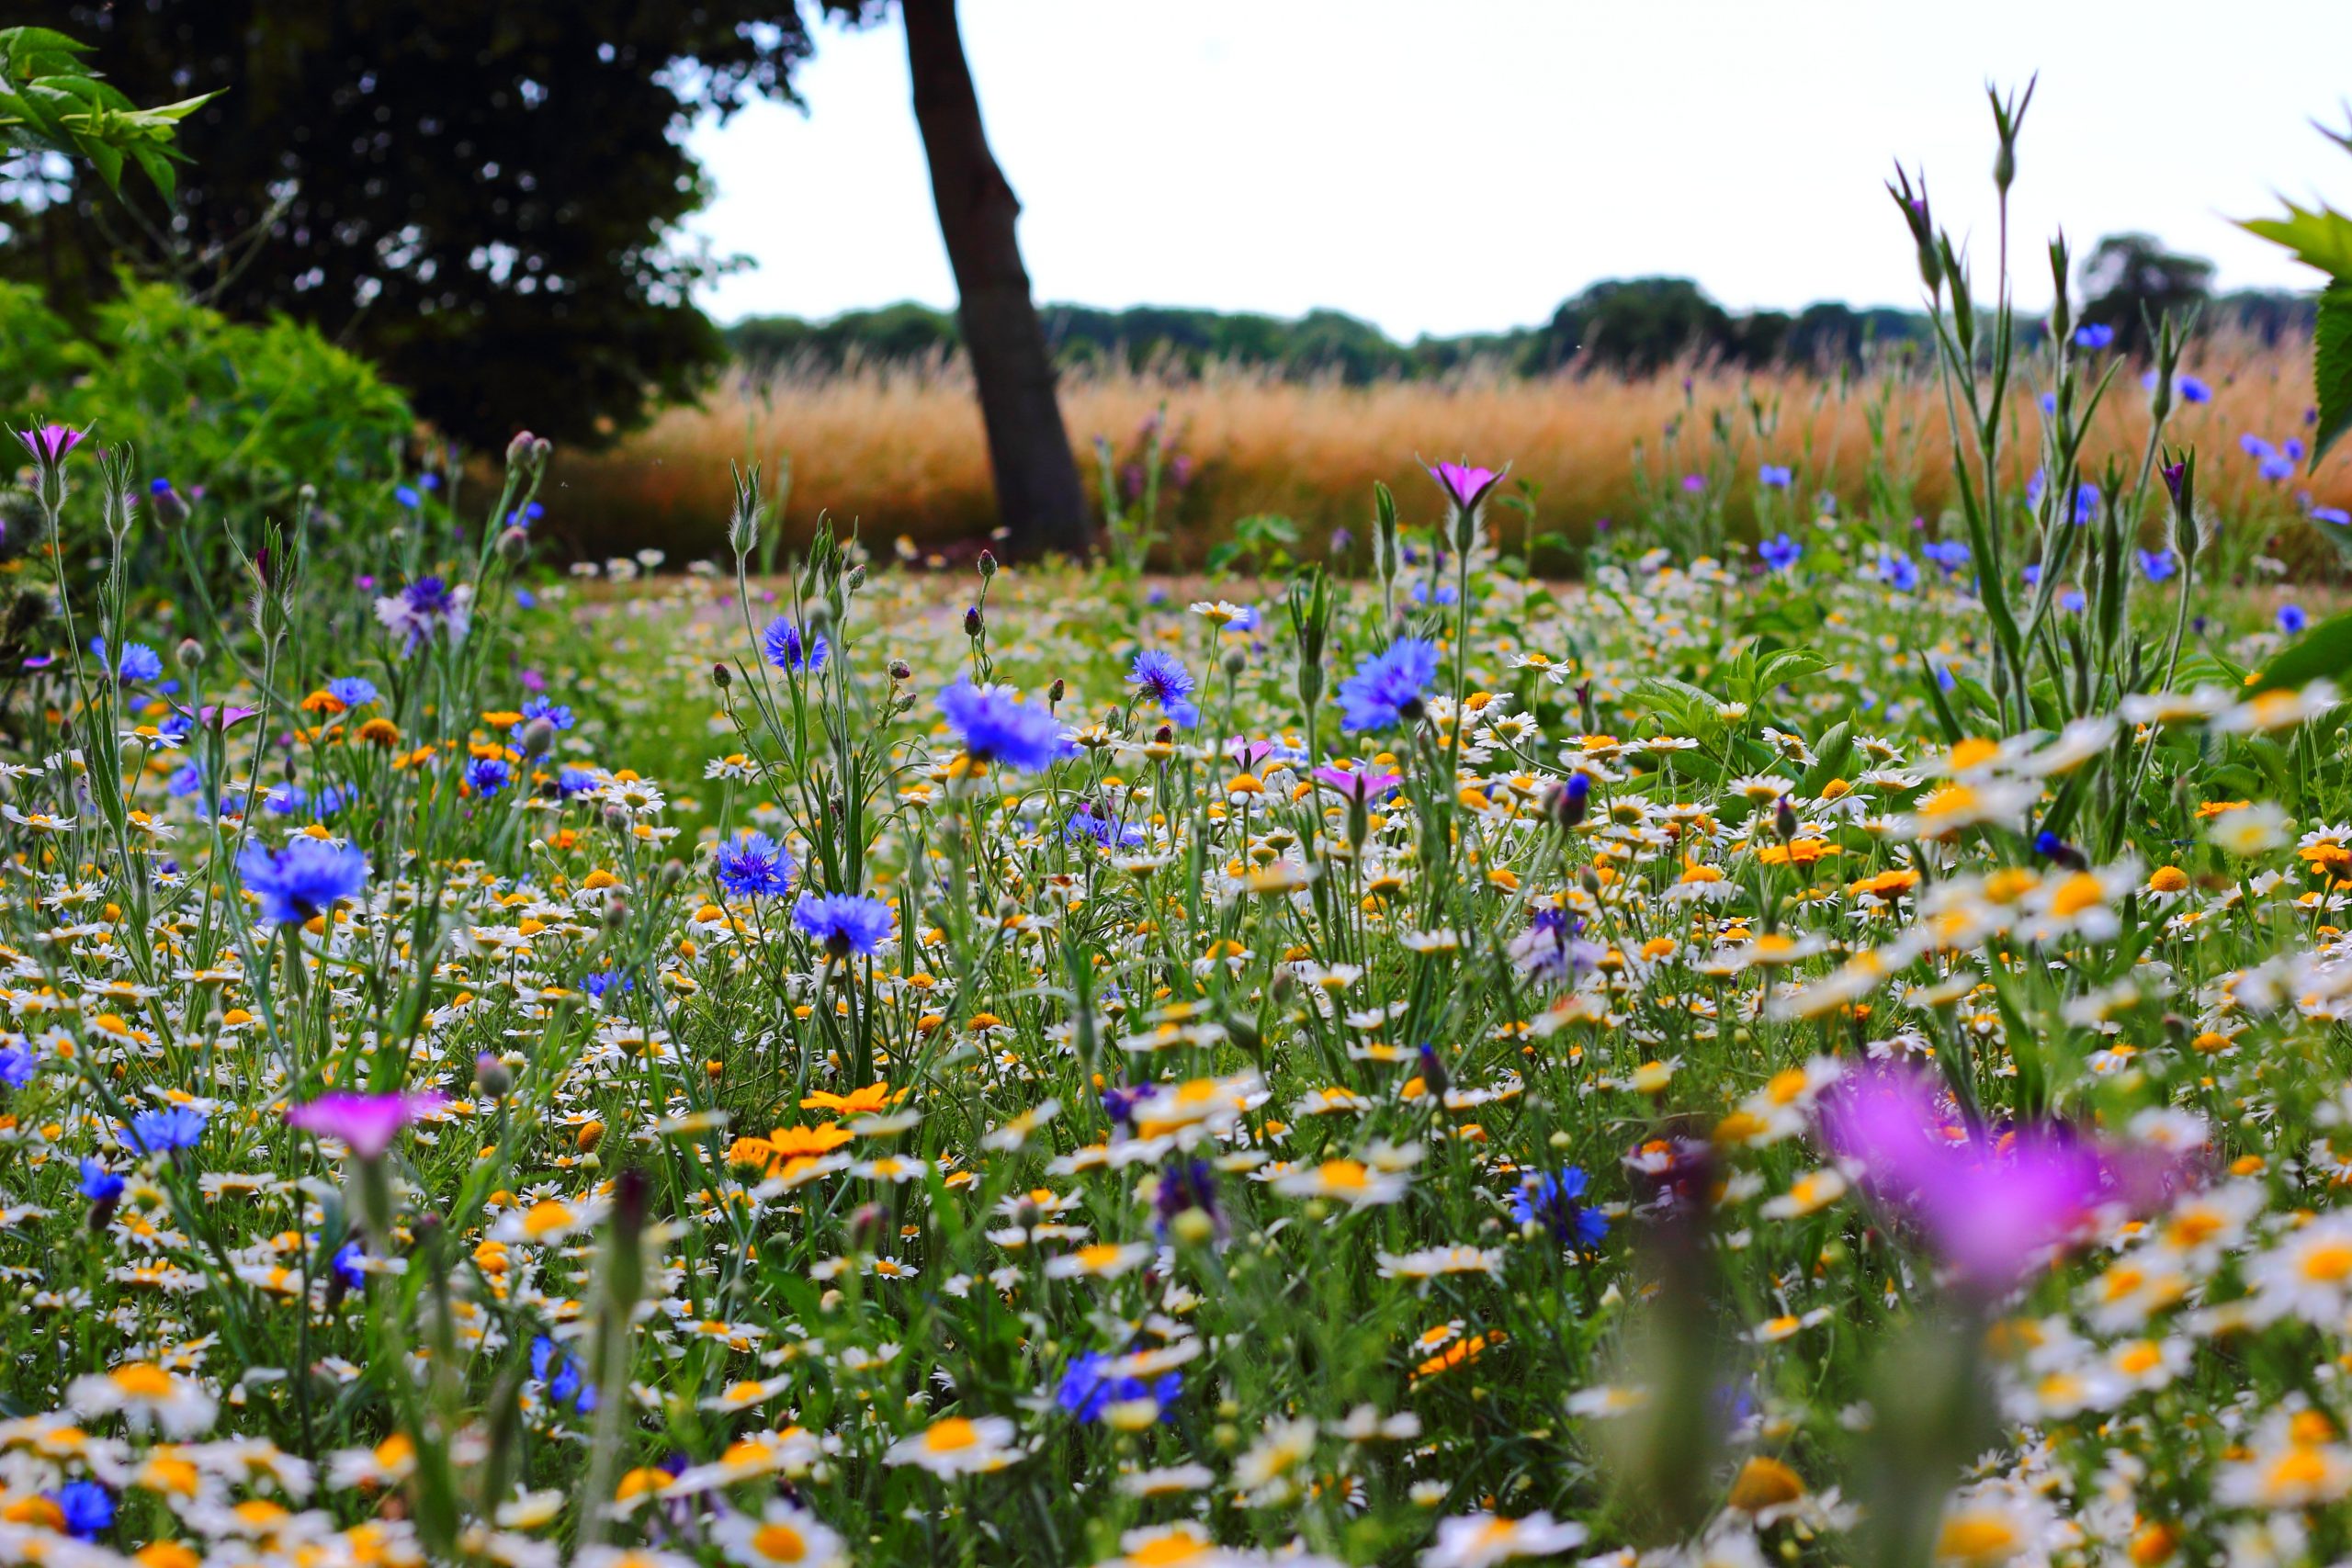 A meadow of flowers - daisies, wild cornflowers and violets.